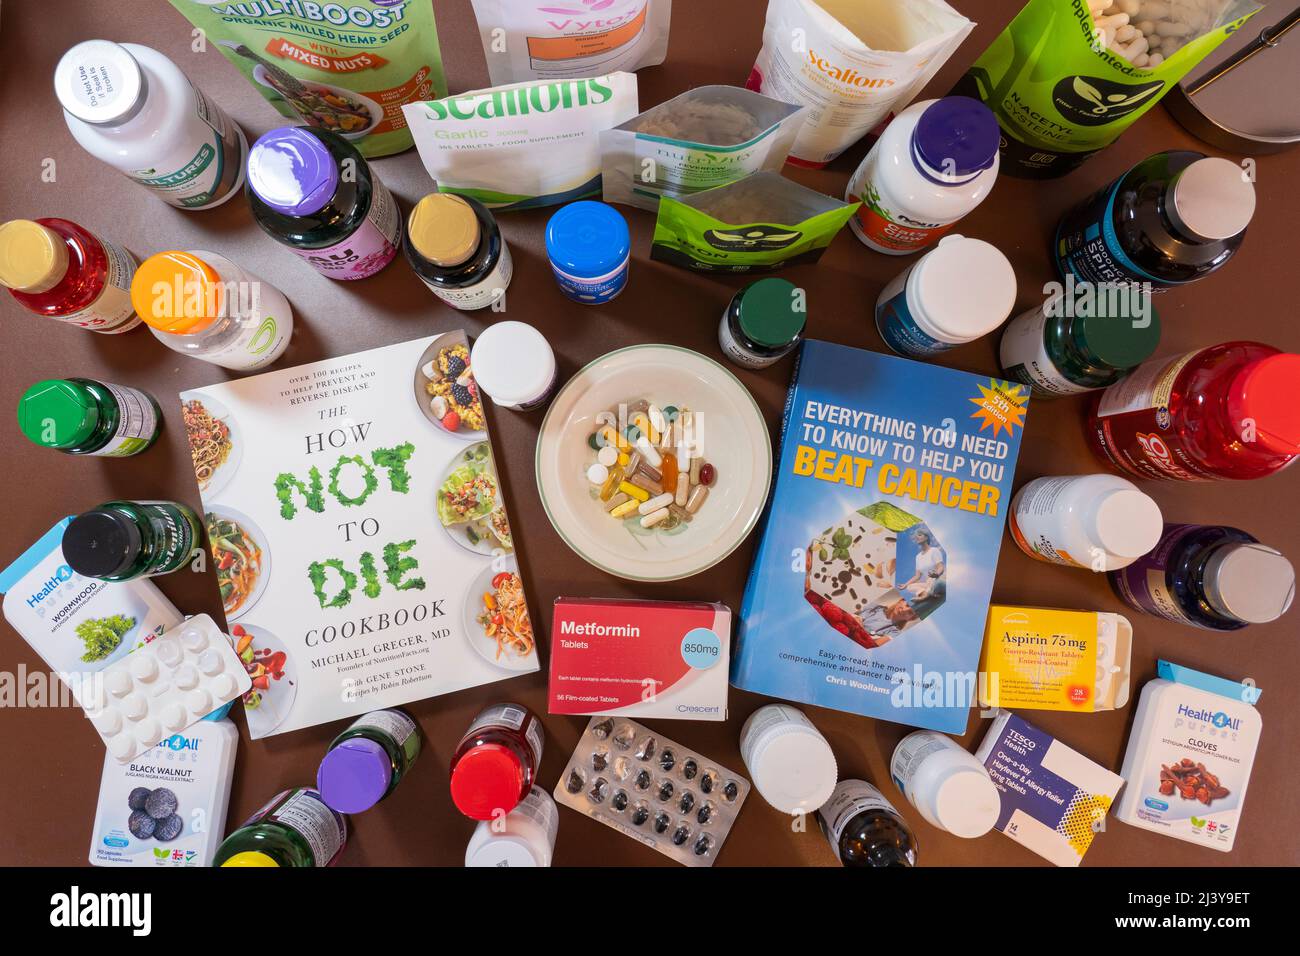 A selection of the many medicines, vitamin and food supplements taken by someone trying to recover from cancer, with books on surviving cancer. UK Stock Photo